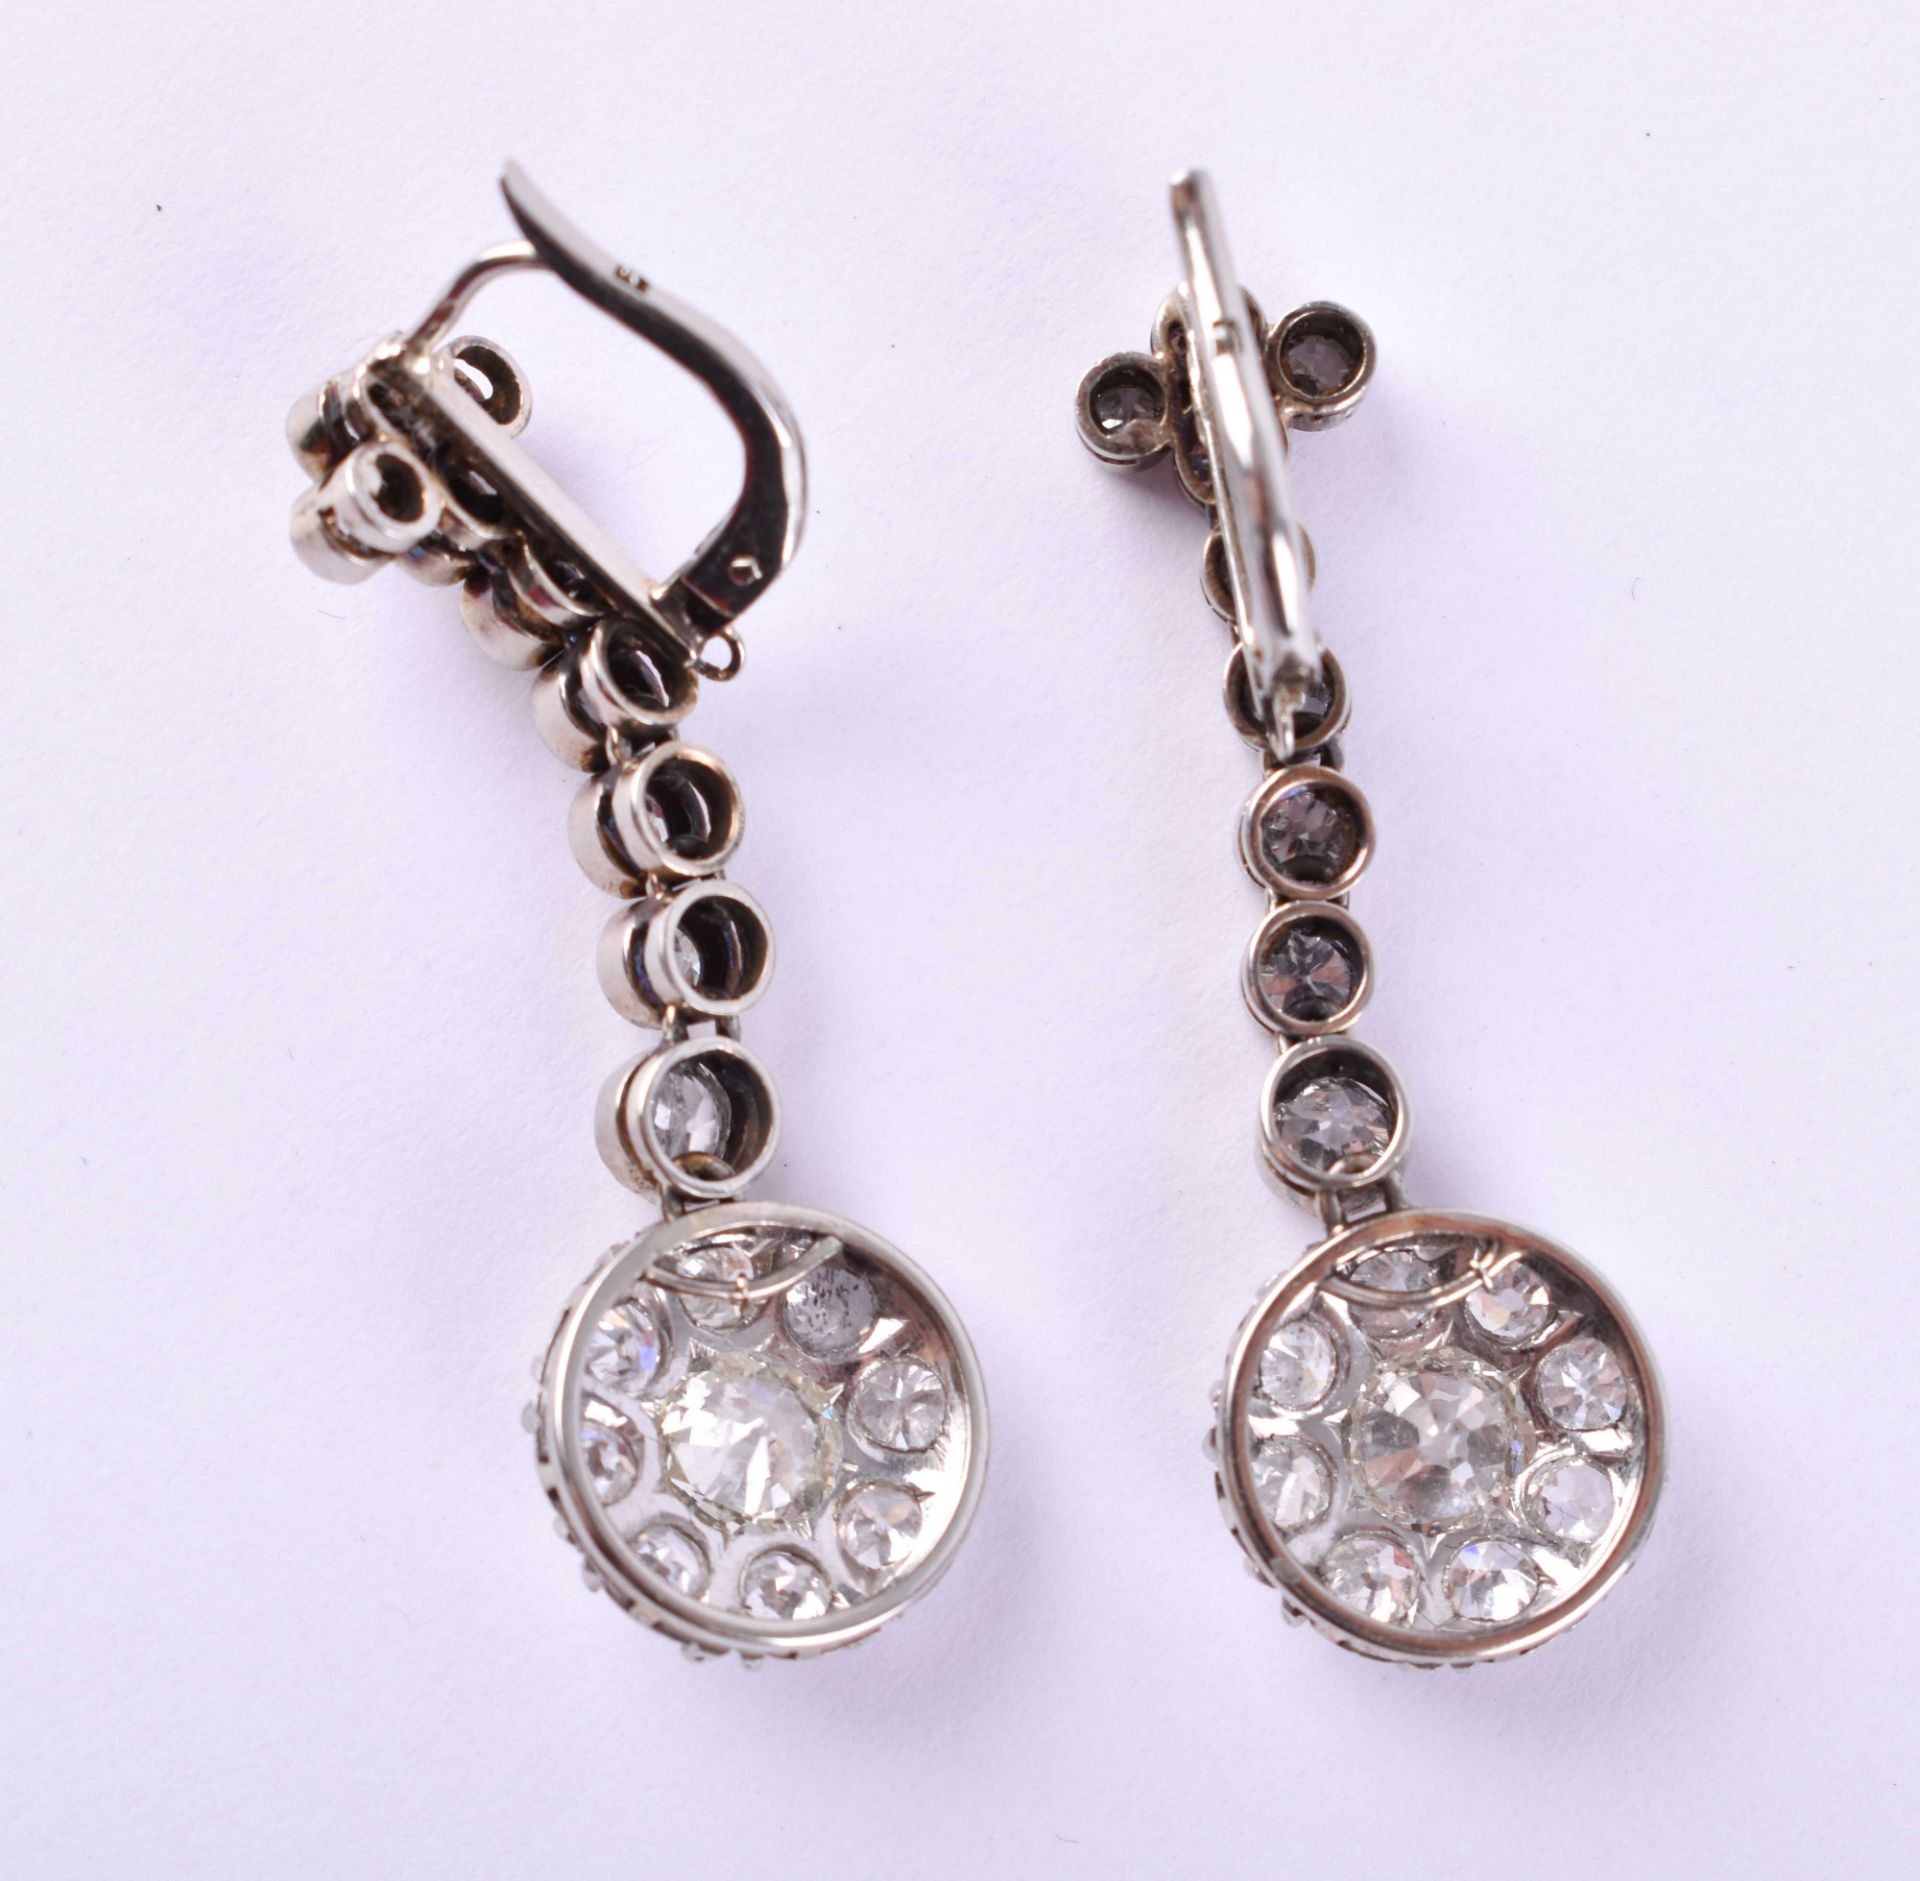  Brilliant earrings France around 1900 - Image 3 of 4